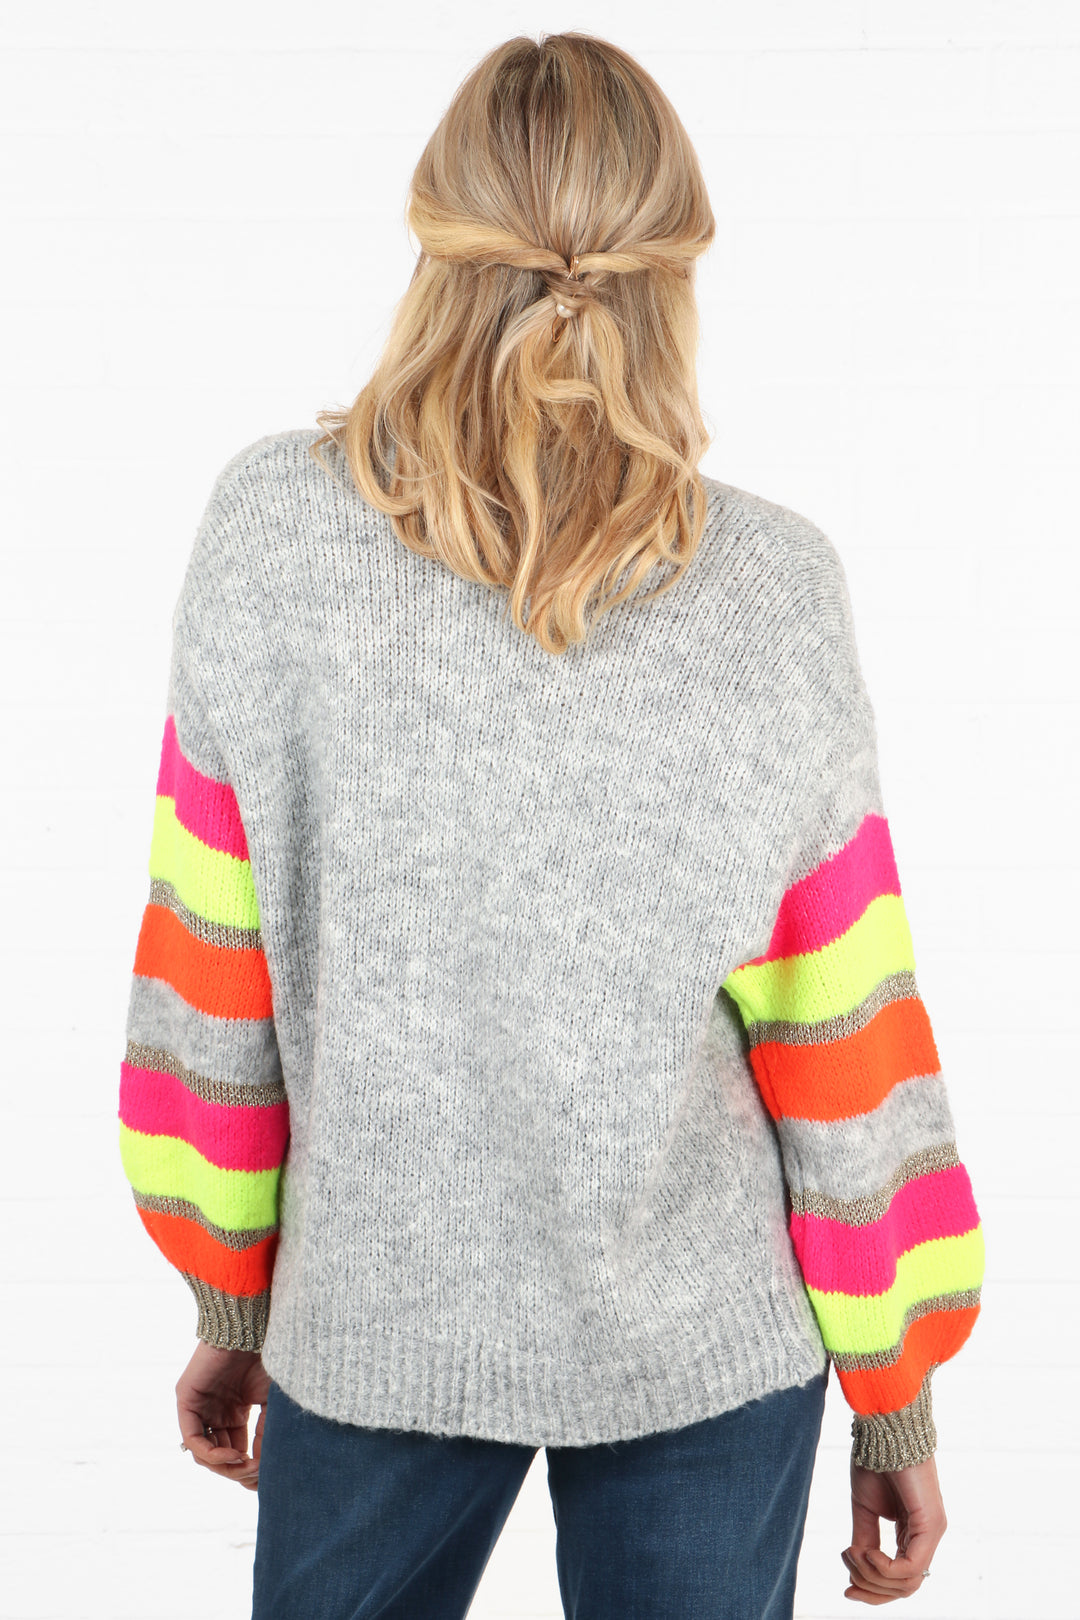 model showing the back of the cardigan which is light grey, the sleeves are multicoloured stiped